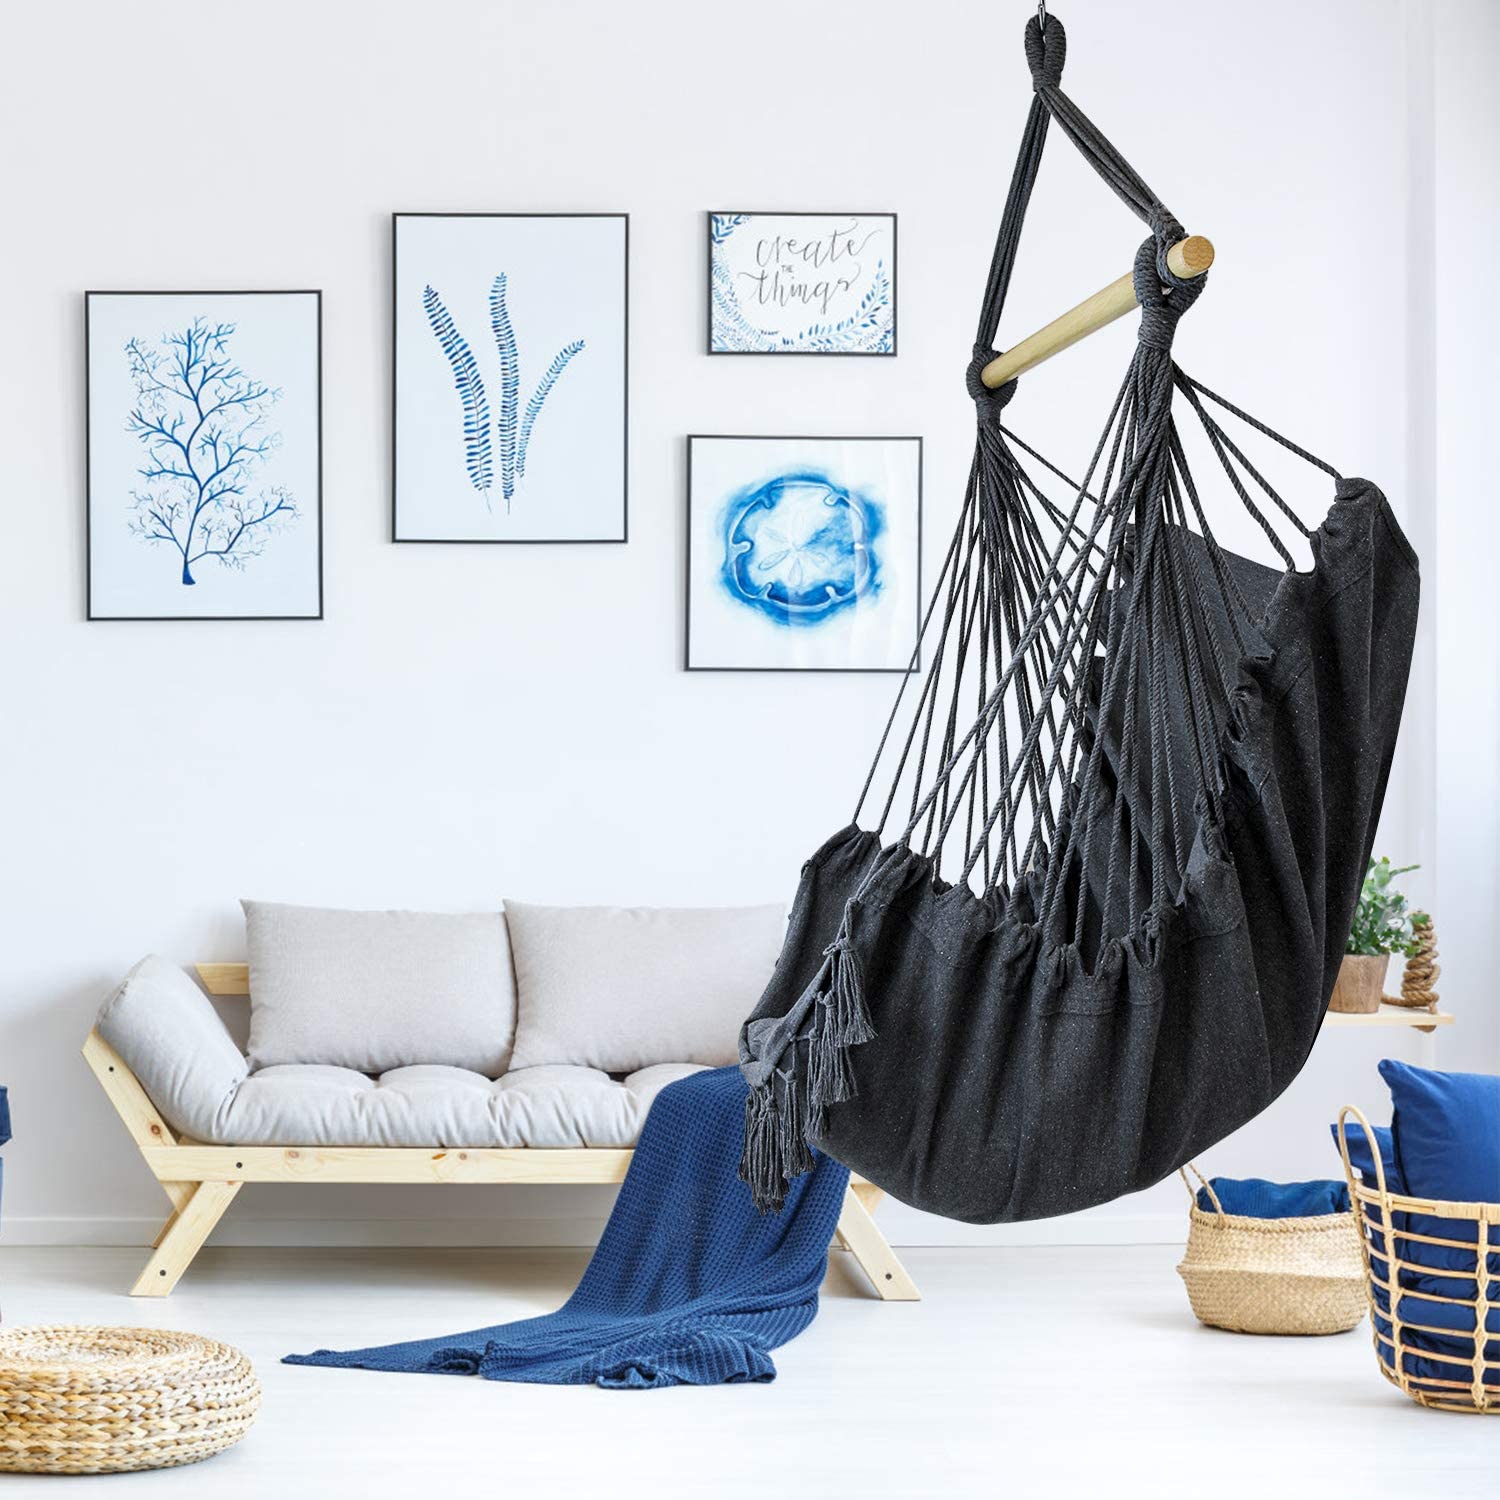 Max-330Lbs150KG-Hammock-Chair-Hanging-Rope-Swing-with-2-Cushions-Included-Large-Tassel-Hanging-Chair-1726402-3